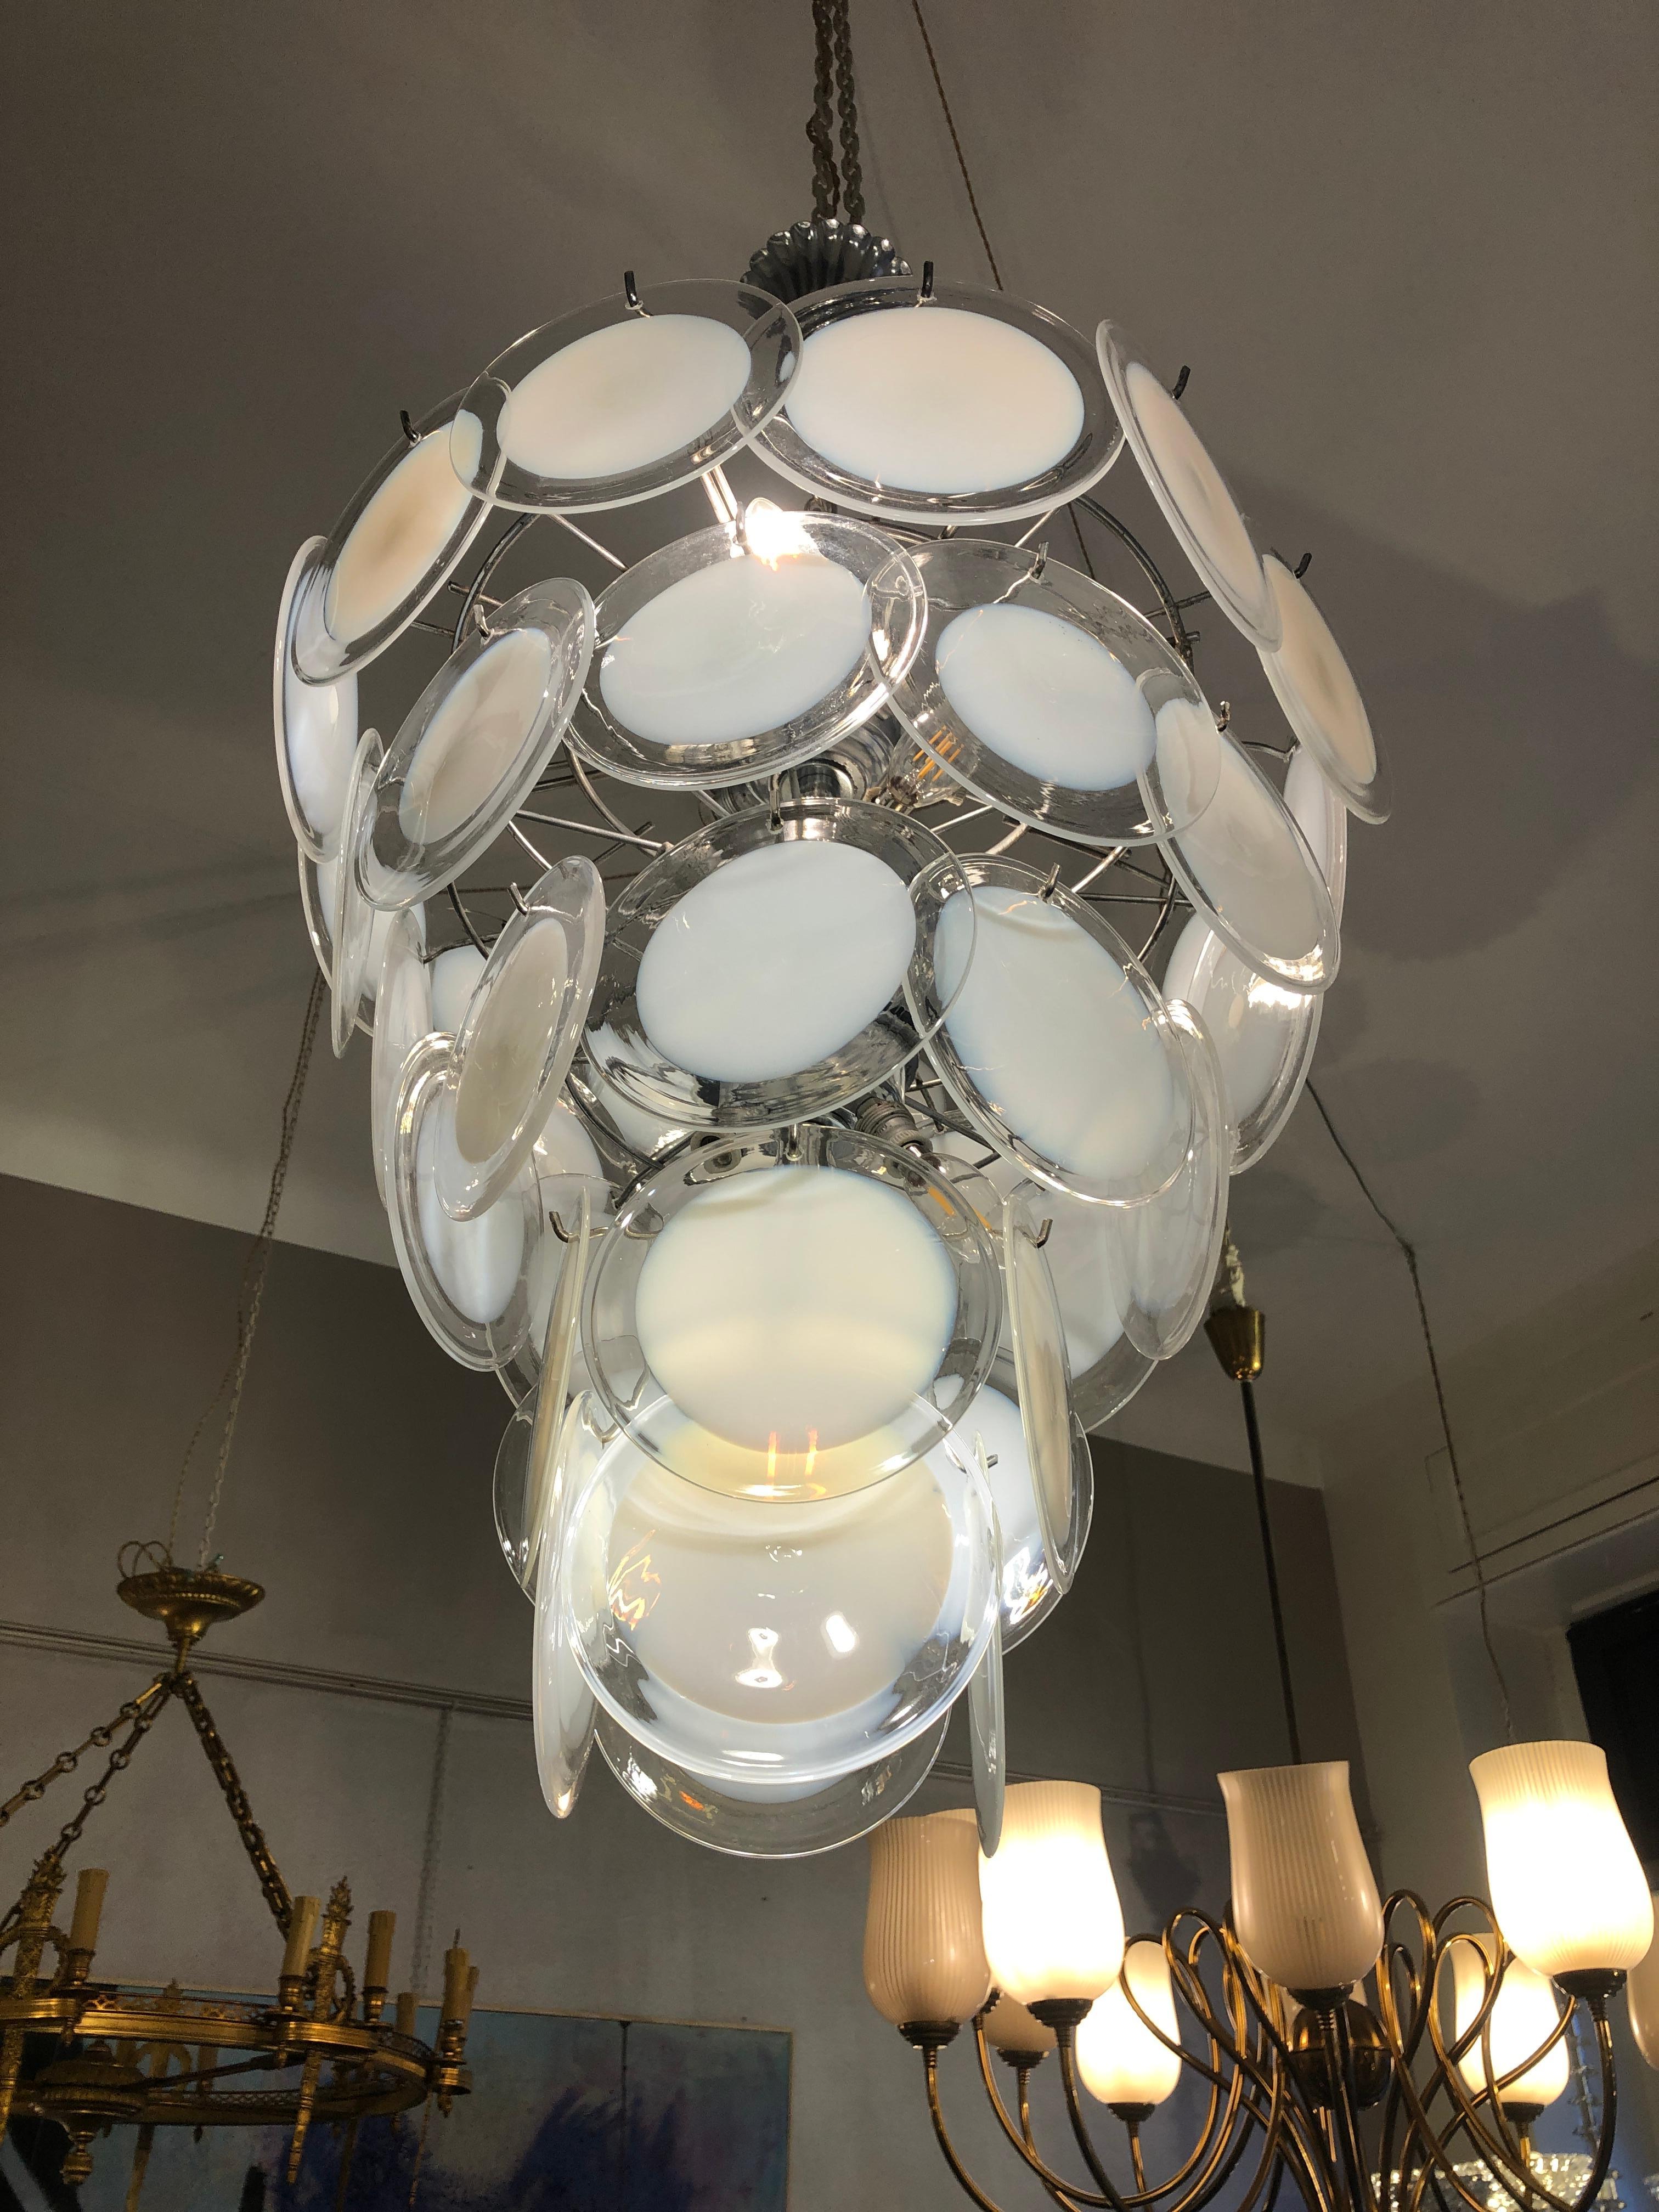 Vistosi for Venini chandelier, 10 lights
The Chandeliers features rounded disks hanged on 
Electric wiring system checked, ready to be used.
Size: diameter 40 cm, height 100 cm in total.
It will be delivered disassembled, do not worry